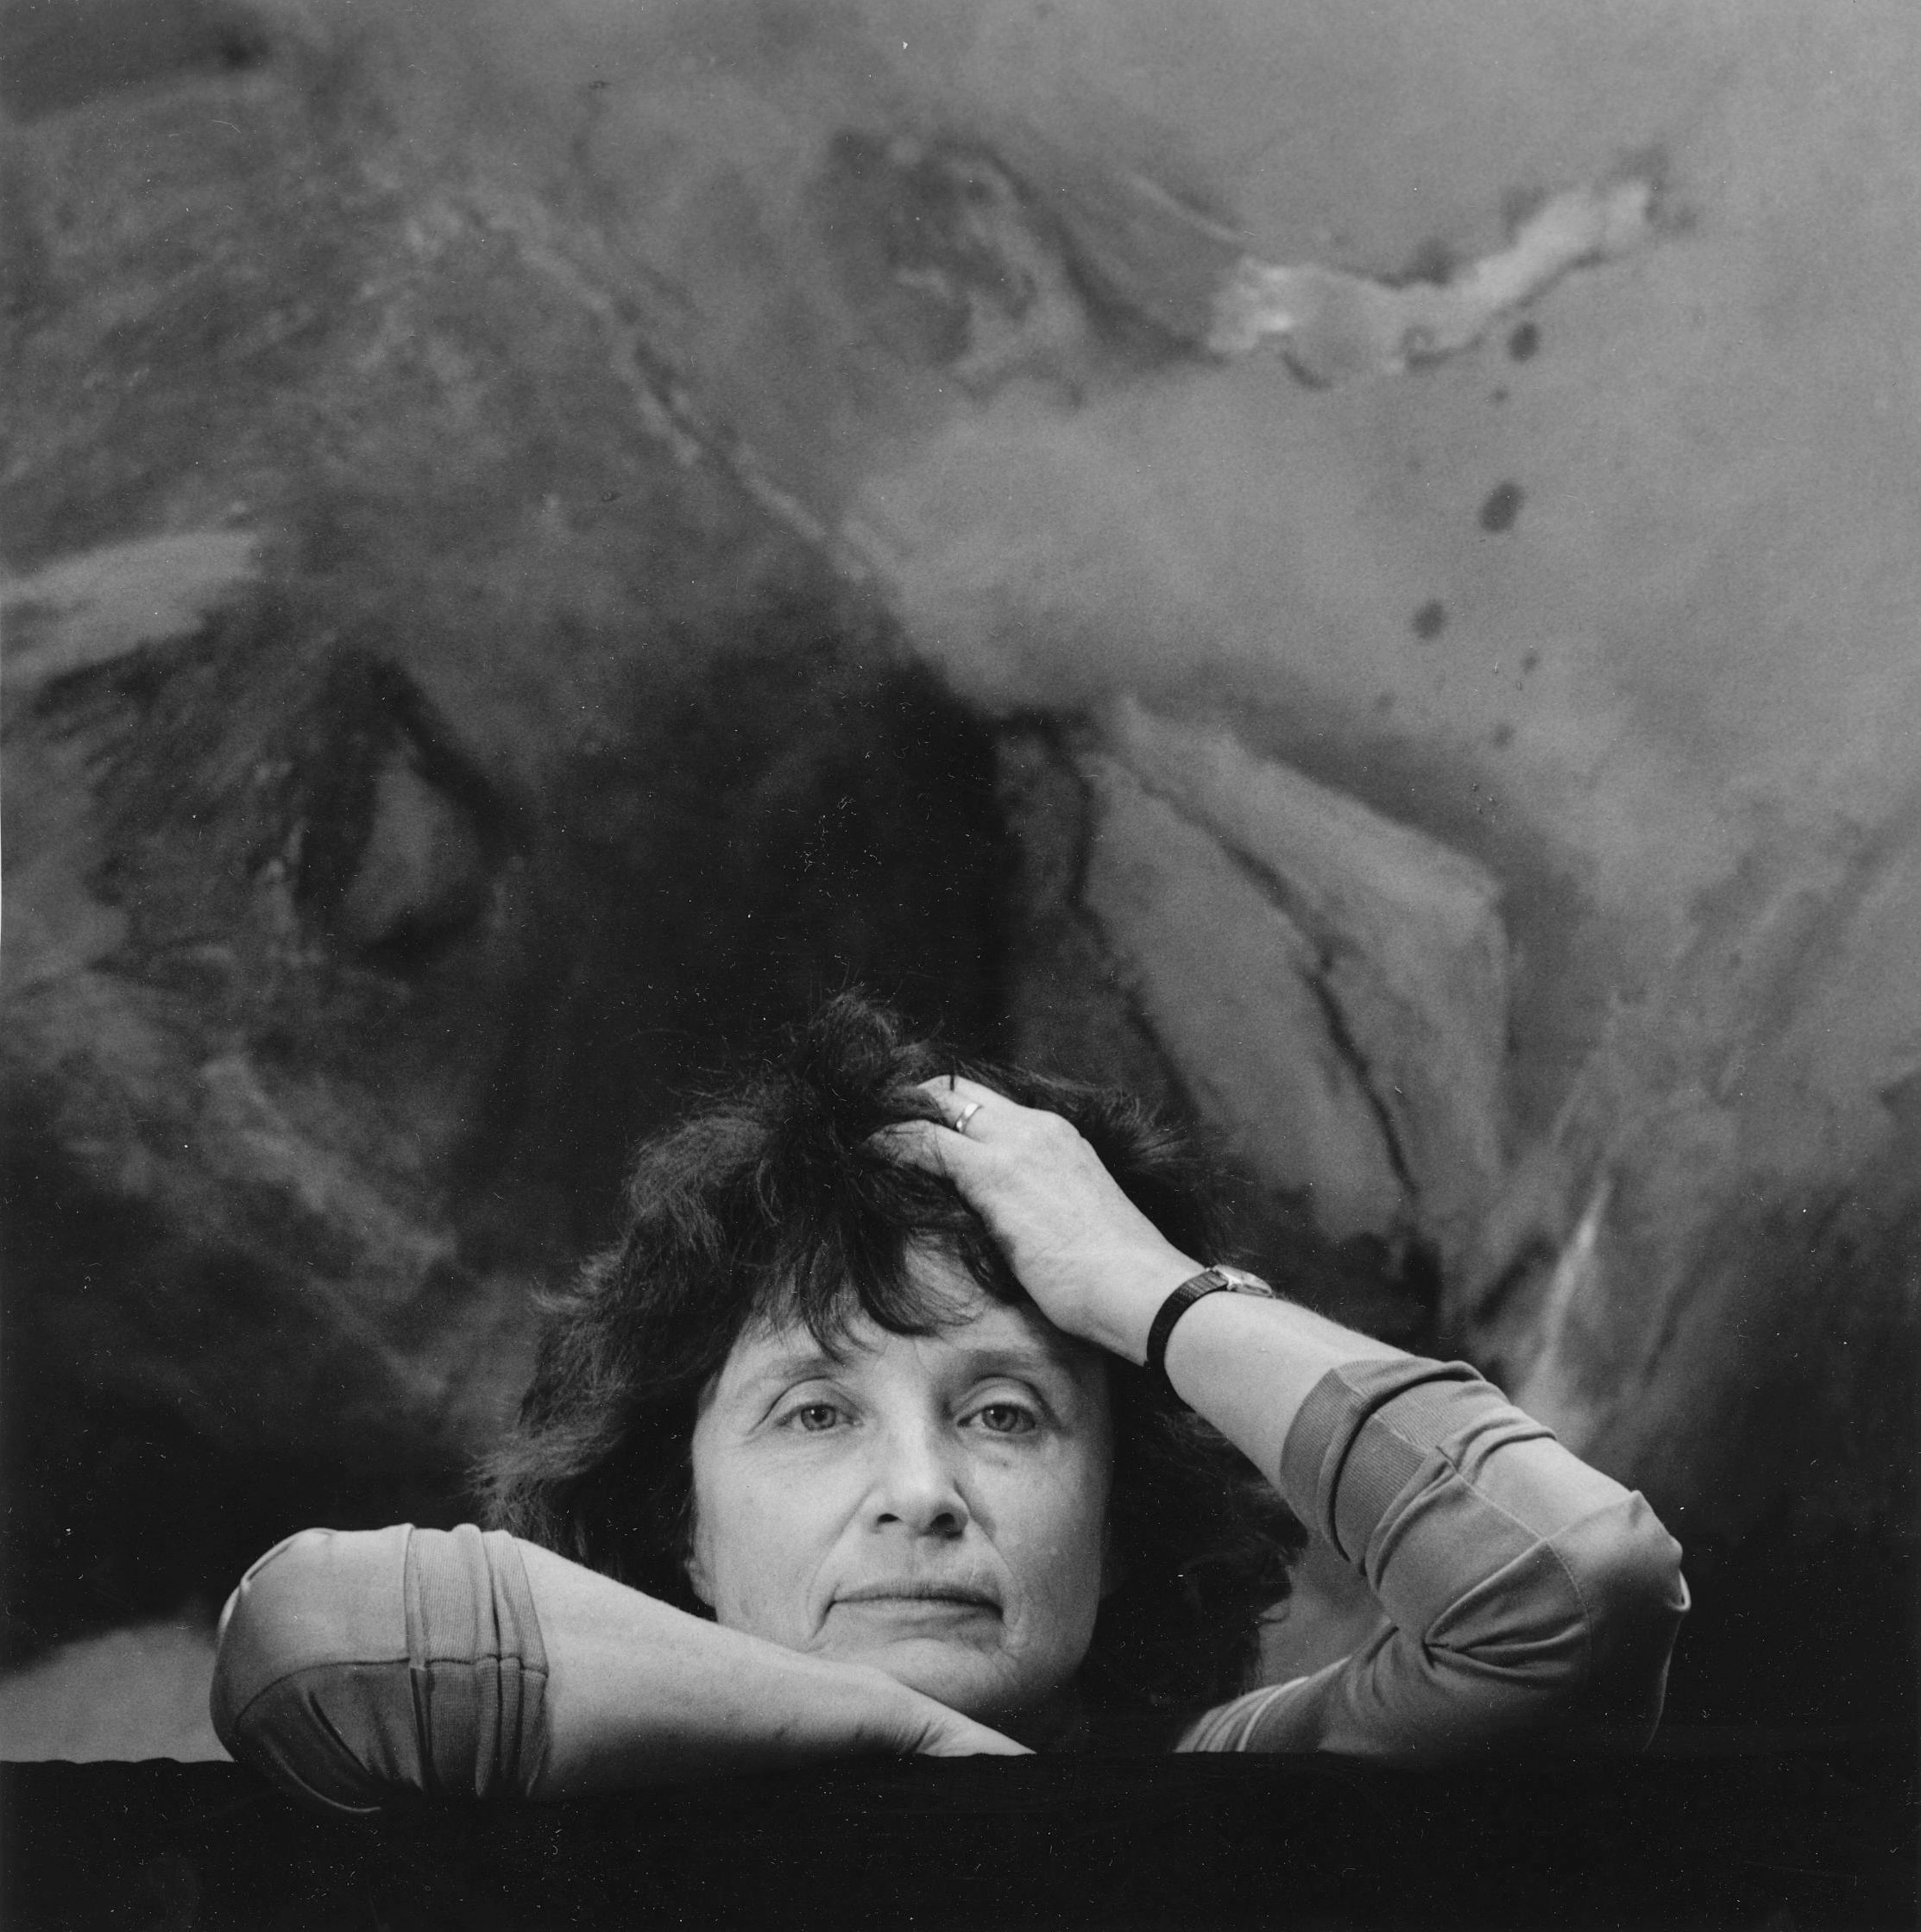 Black and white portrait photograph of a woman with pale skin in front of an abstract painting; just her face and arms are shown as she leans her elbows on a flat surface.